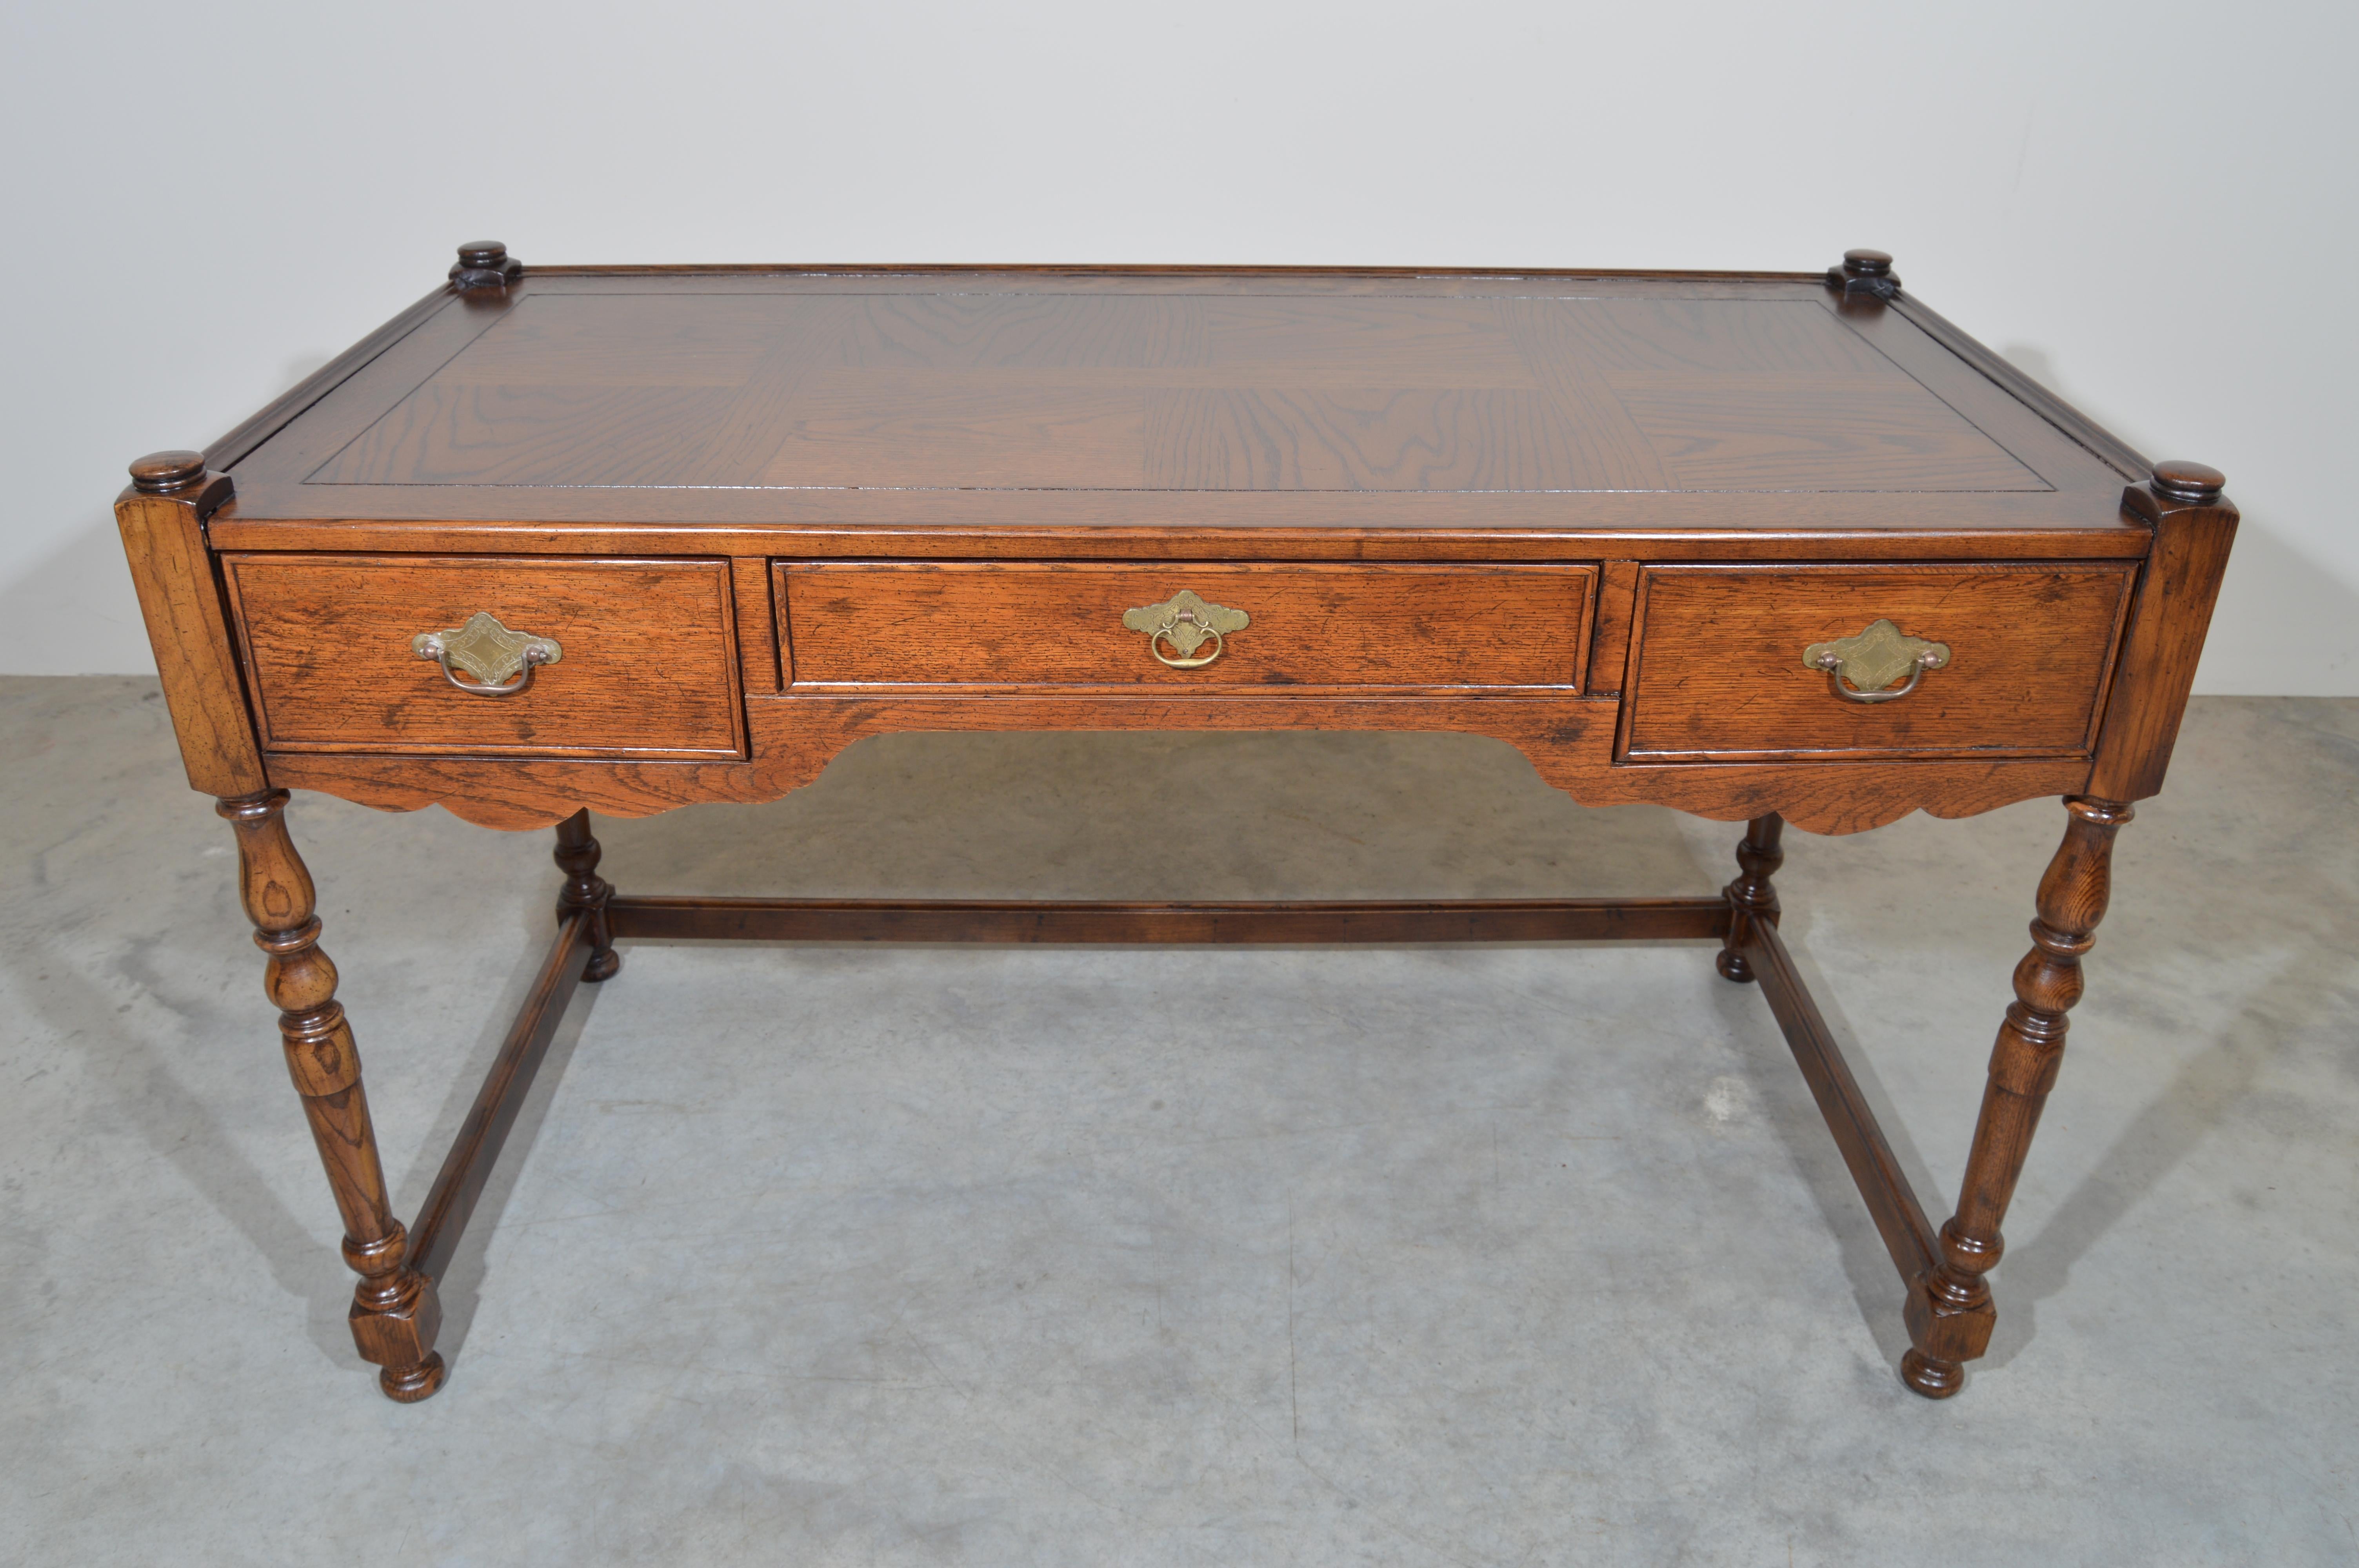 A beautiful Henredon Heritage Walnut Writing Desk having turned legs with classic carved features throughout. A classic regency workspace designed to save space and look gorgeous. Each drawer features antique regency brass pulls with the center